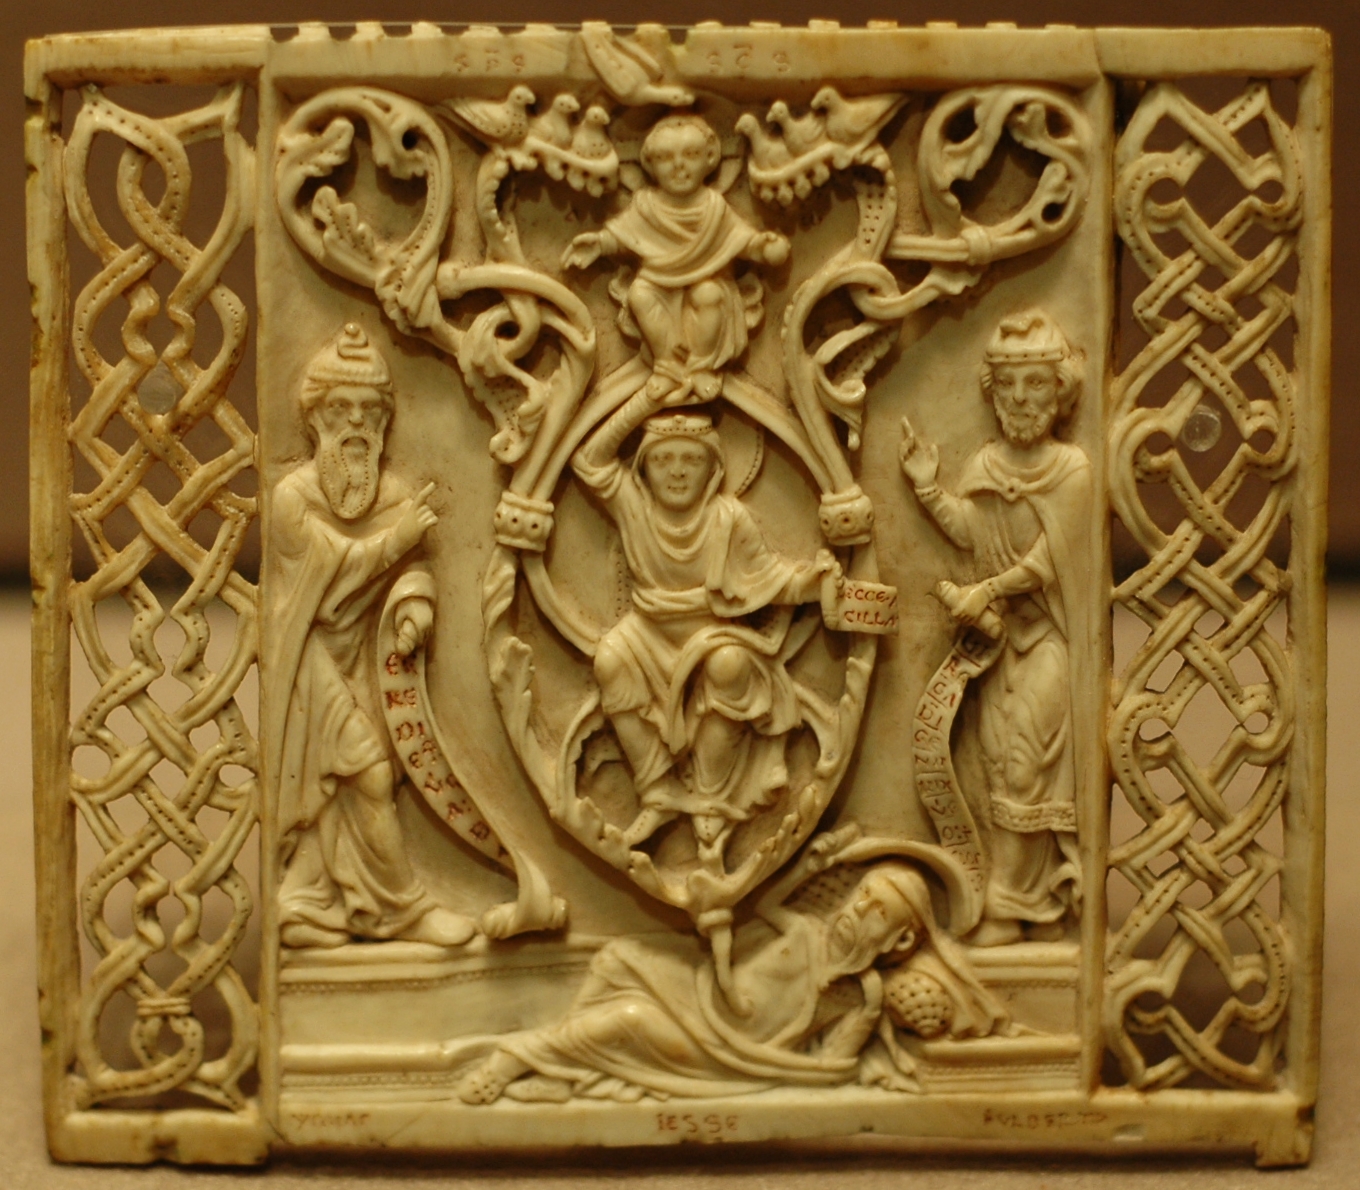 An ivory sculpture. a man lying on the ground appears to have a root protruding from his bellybutton and stretching into branches. In the branches are a man holding a scroll, a child, and several birds. The branches are flanked on either side by men holding scrolls. The sculpture is very ornate.